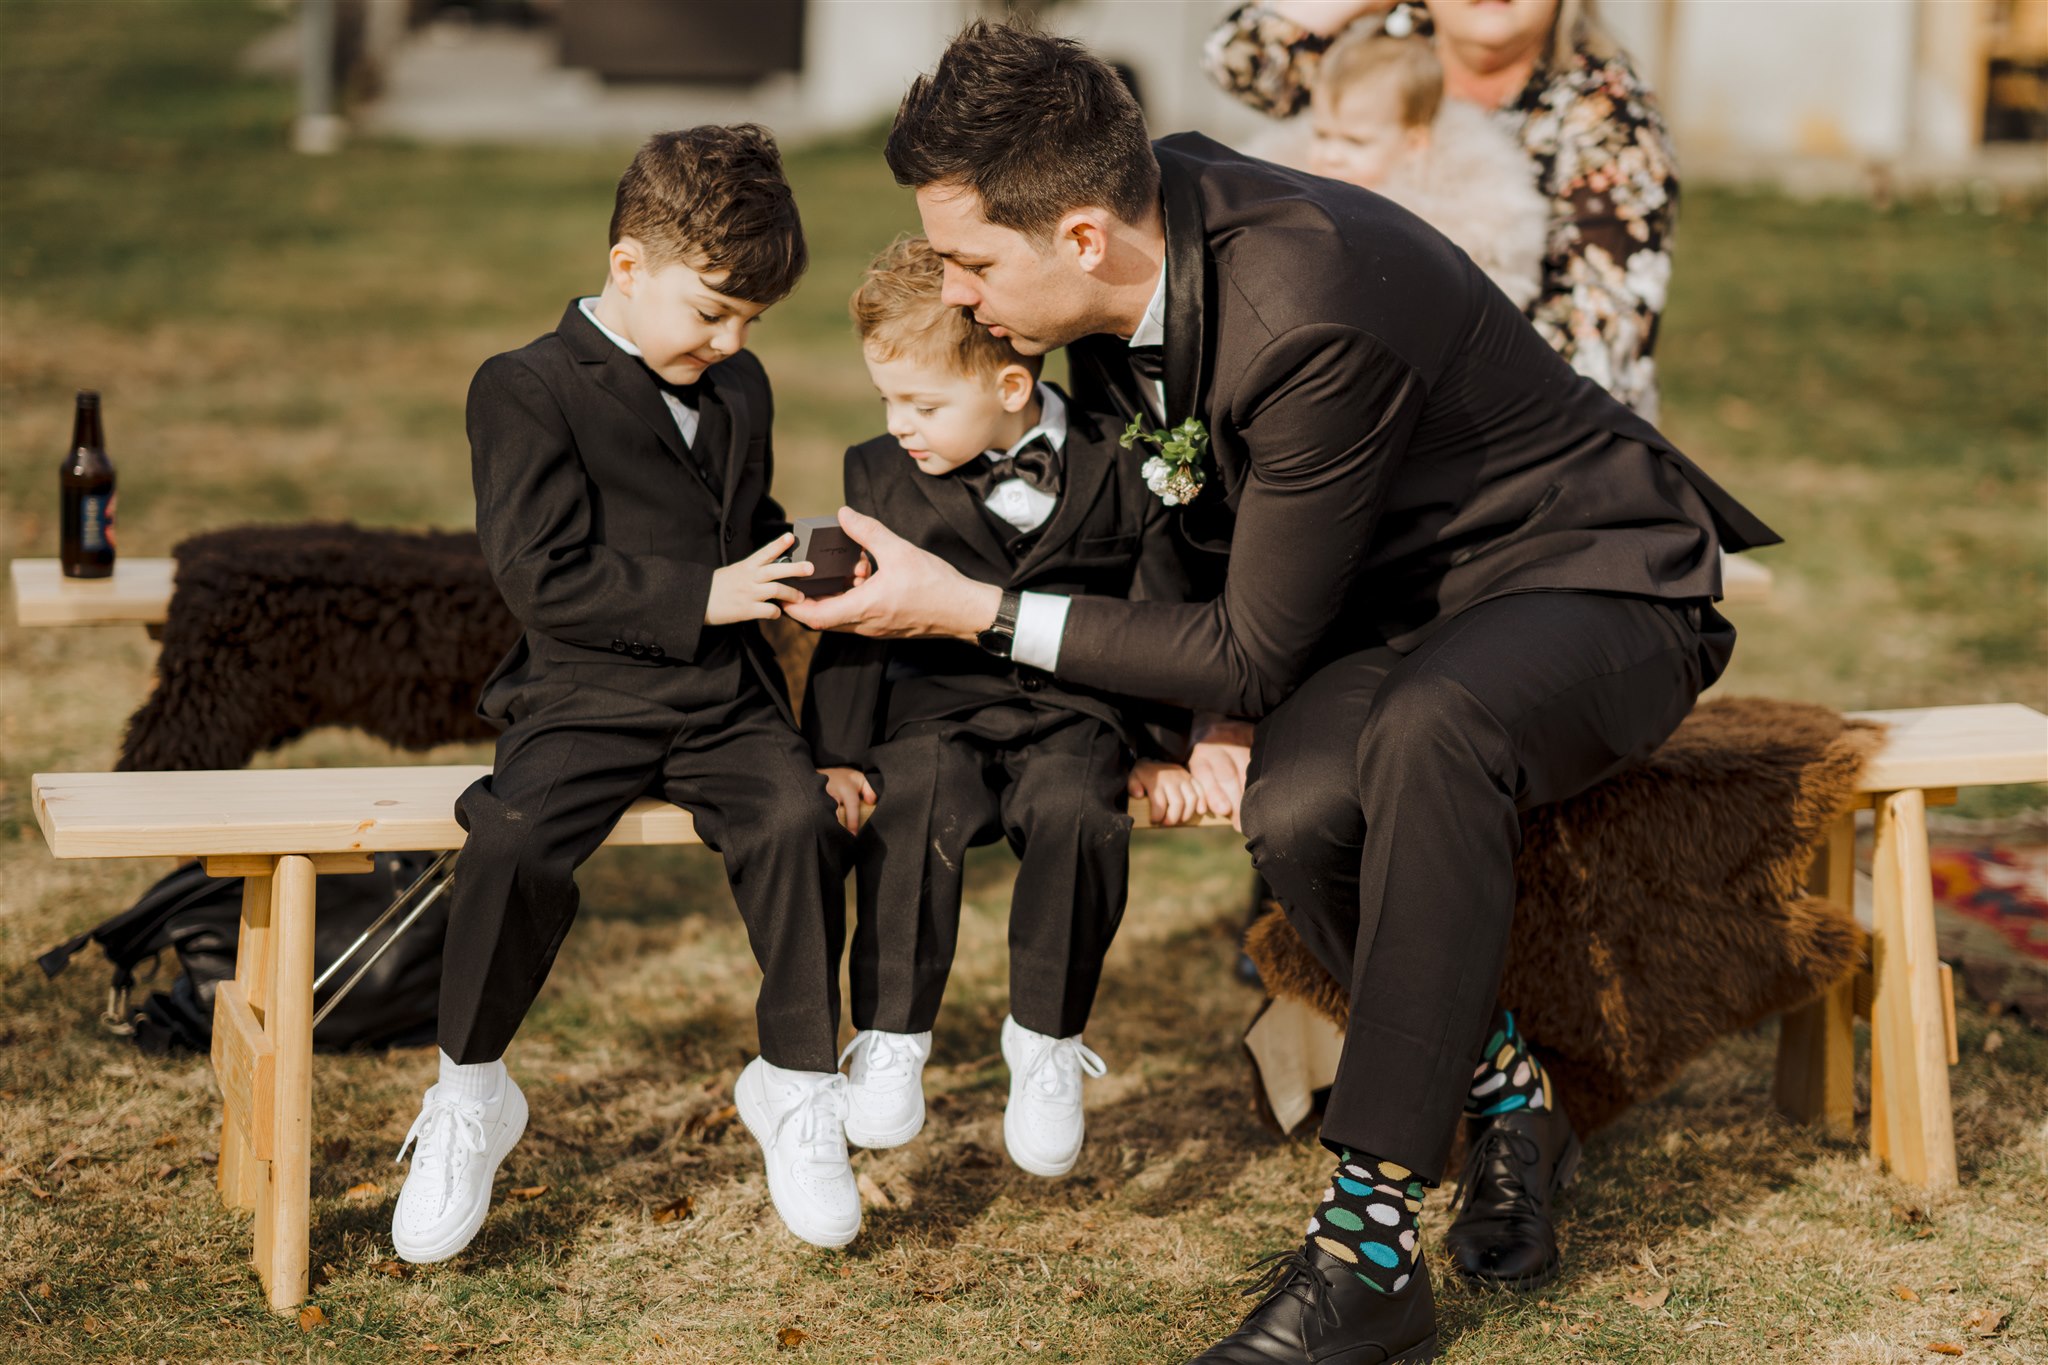 ring bearer boys and groomsmen hold wedding rings during wedding ceremony in Queenstown, New Zealand